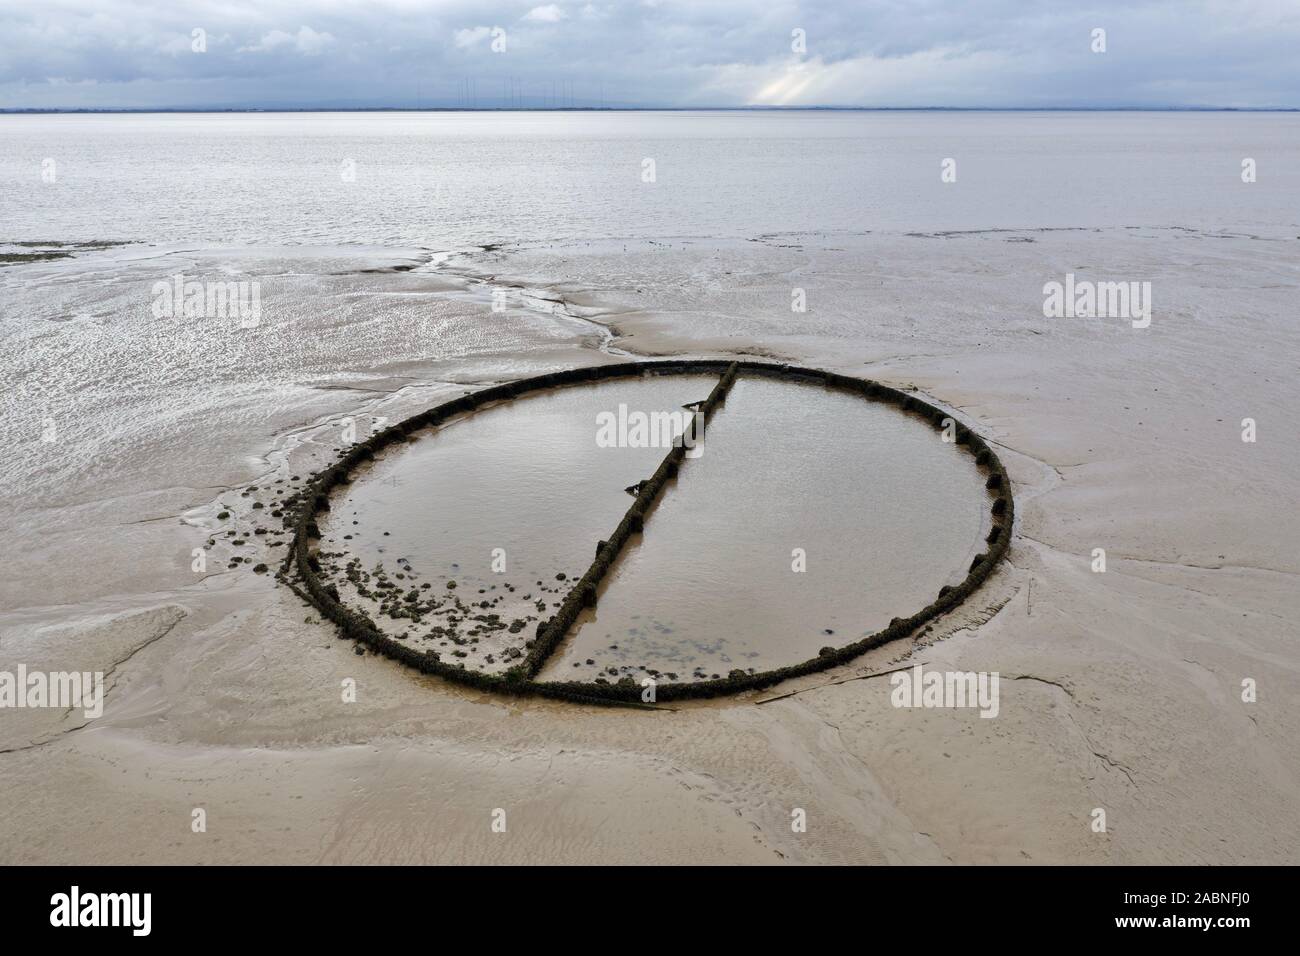 An aerial view of the famous Victorian tidal swimming pool at Powfoot, Dumfries and Galloway in the Solway Firth, UK at low tide. Stock Photo